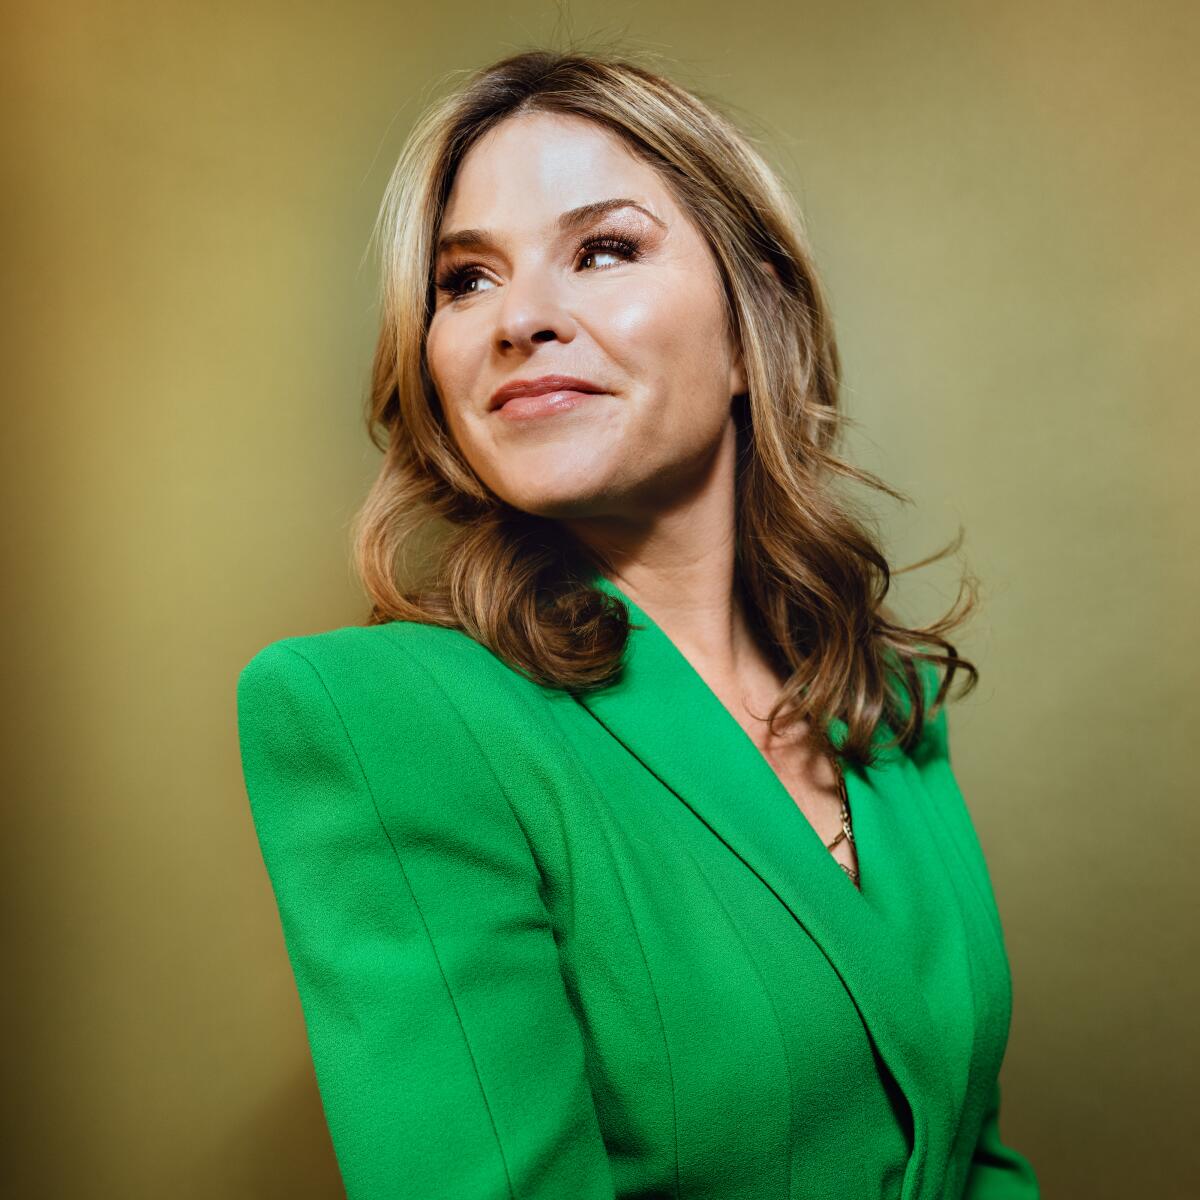 Portrait of a woman in a green business jacket